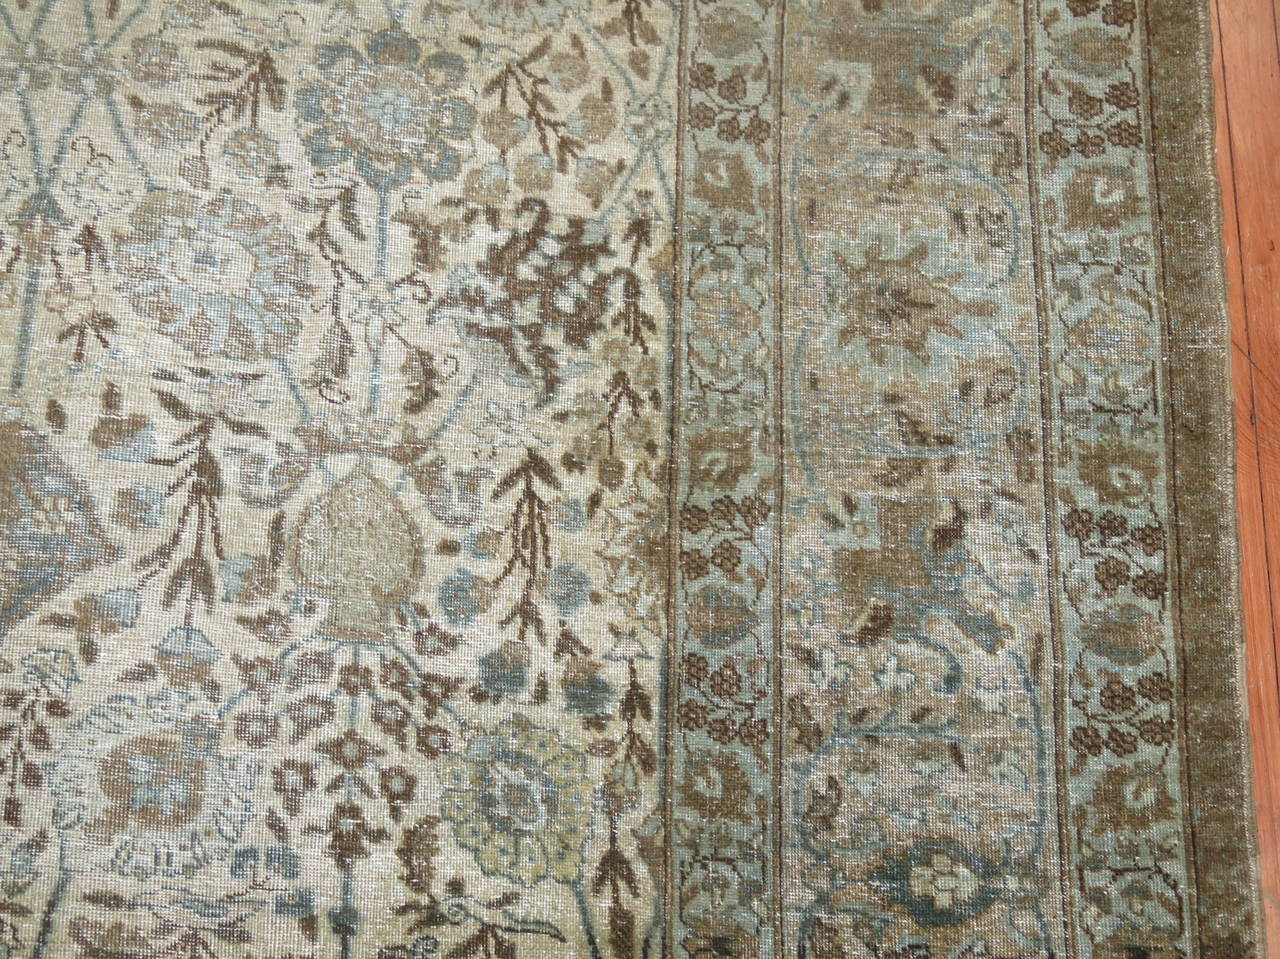 Wool Neutral Antique Persian Tabriz Rug with Pictorial Animal Border